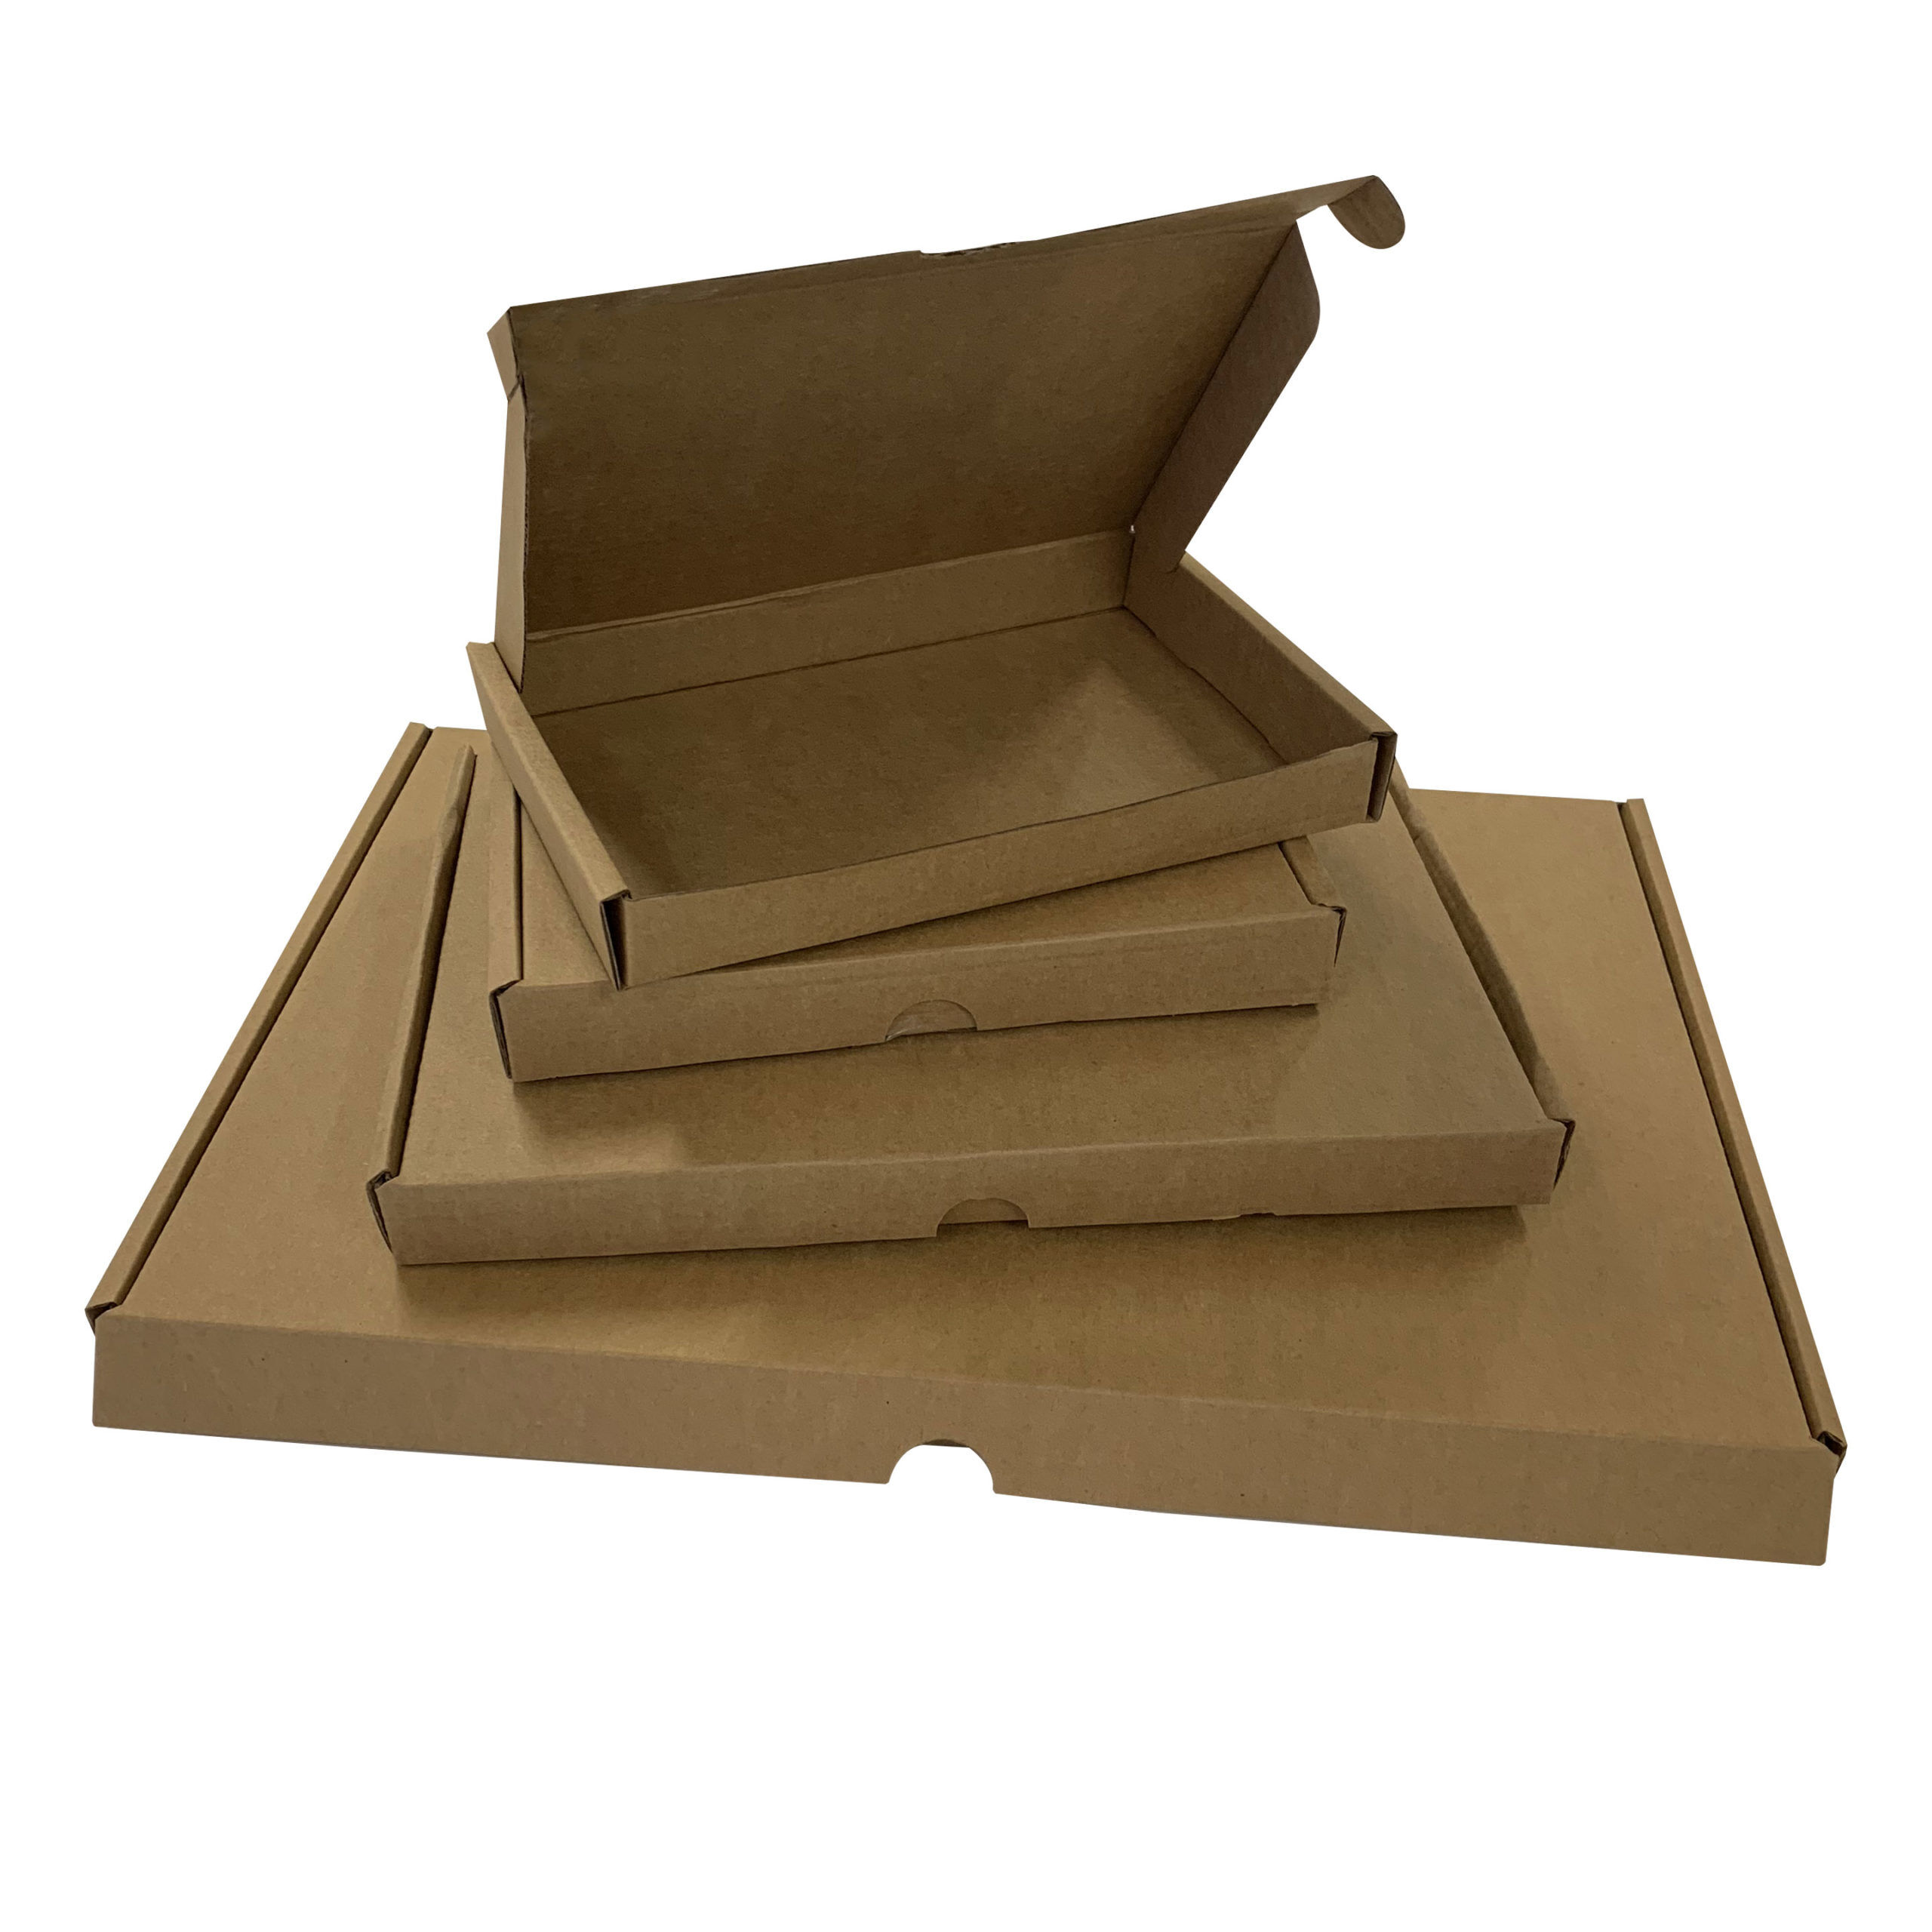 Strong Royal Mail Large Letter and Small Parcel Cardboard Postal Boxes All Sizes 